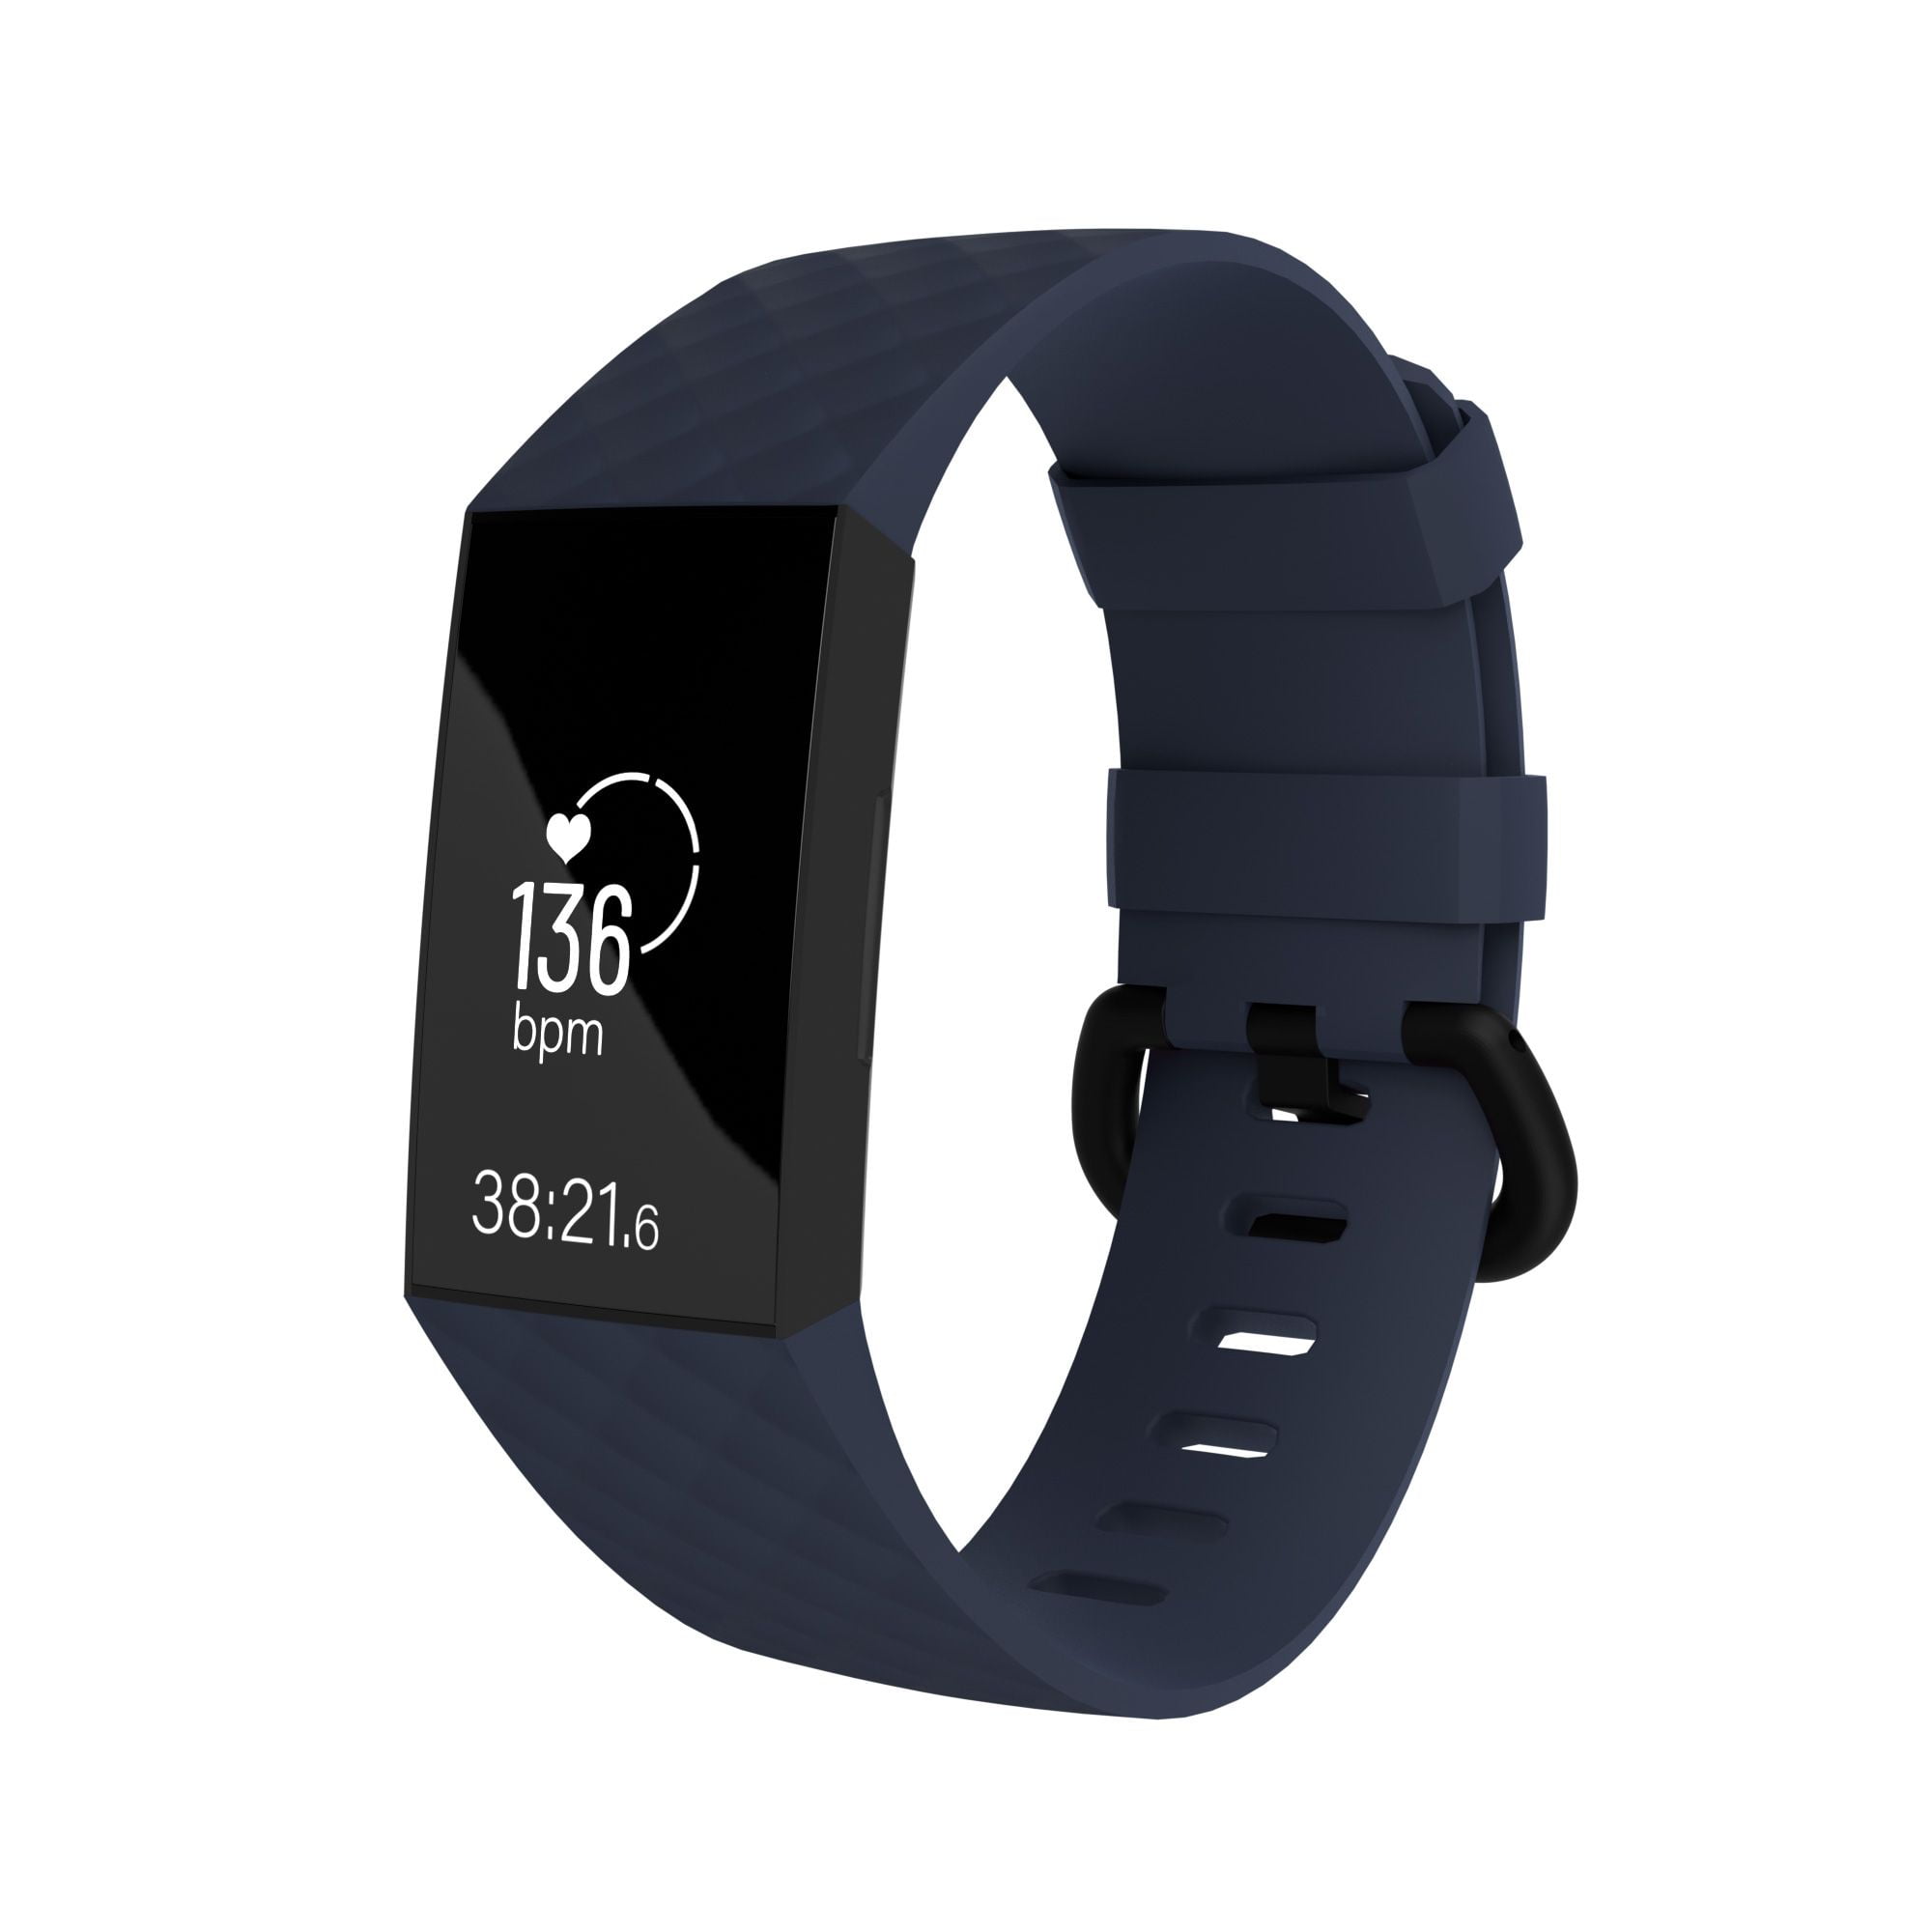 Zodaca - Fitbit Charge 3 bands, by 